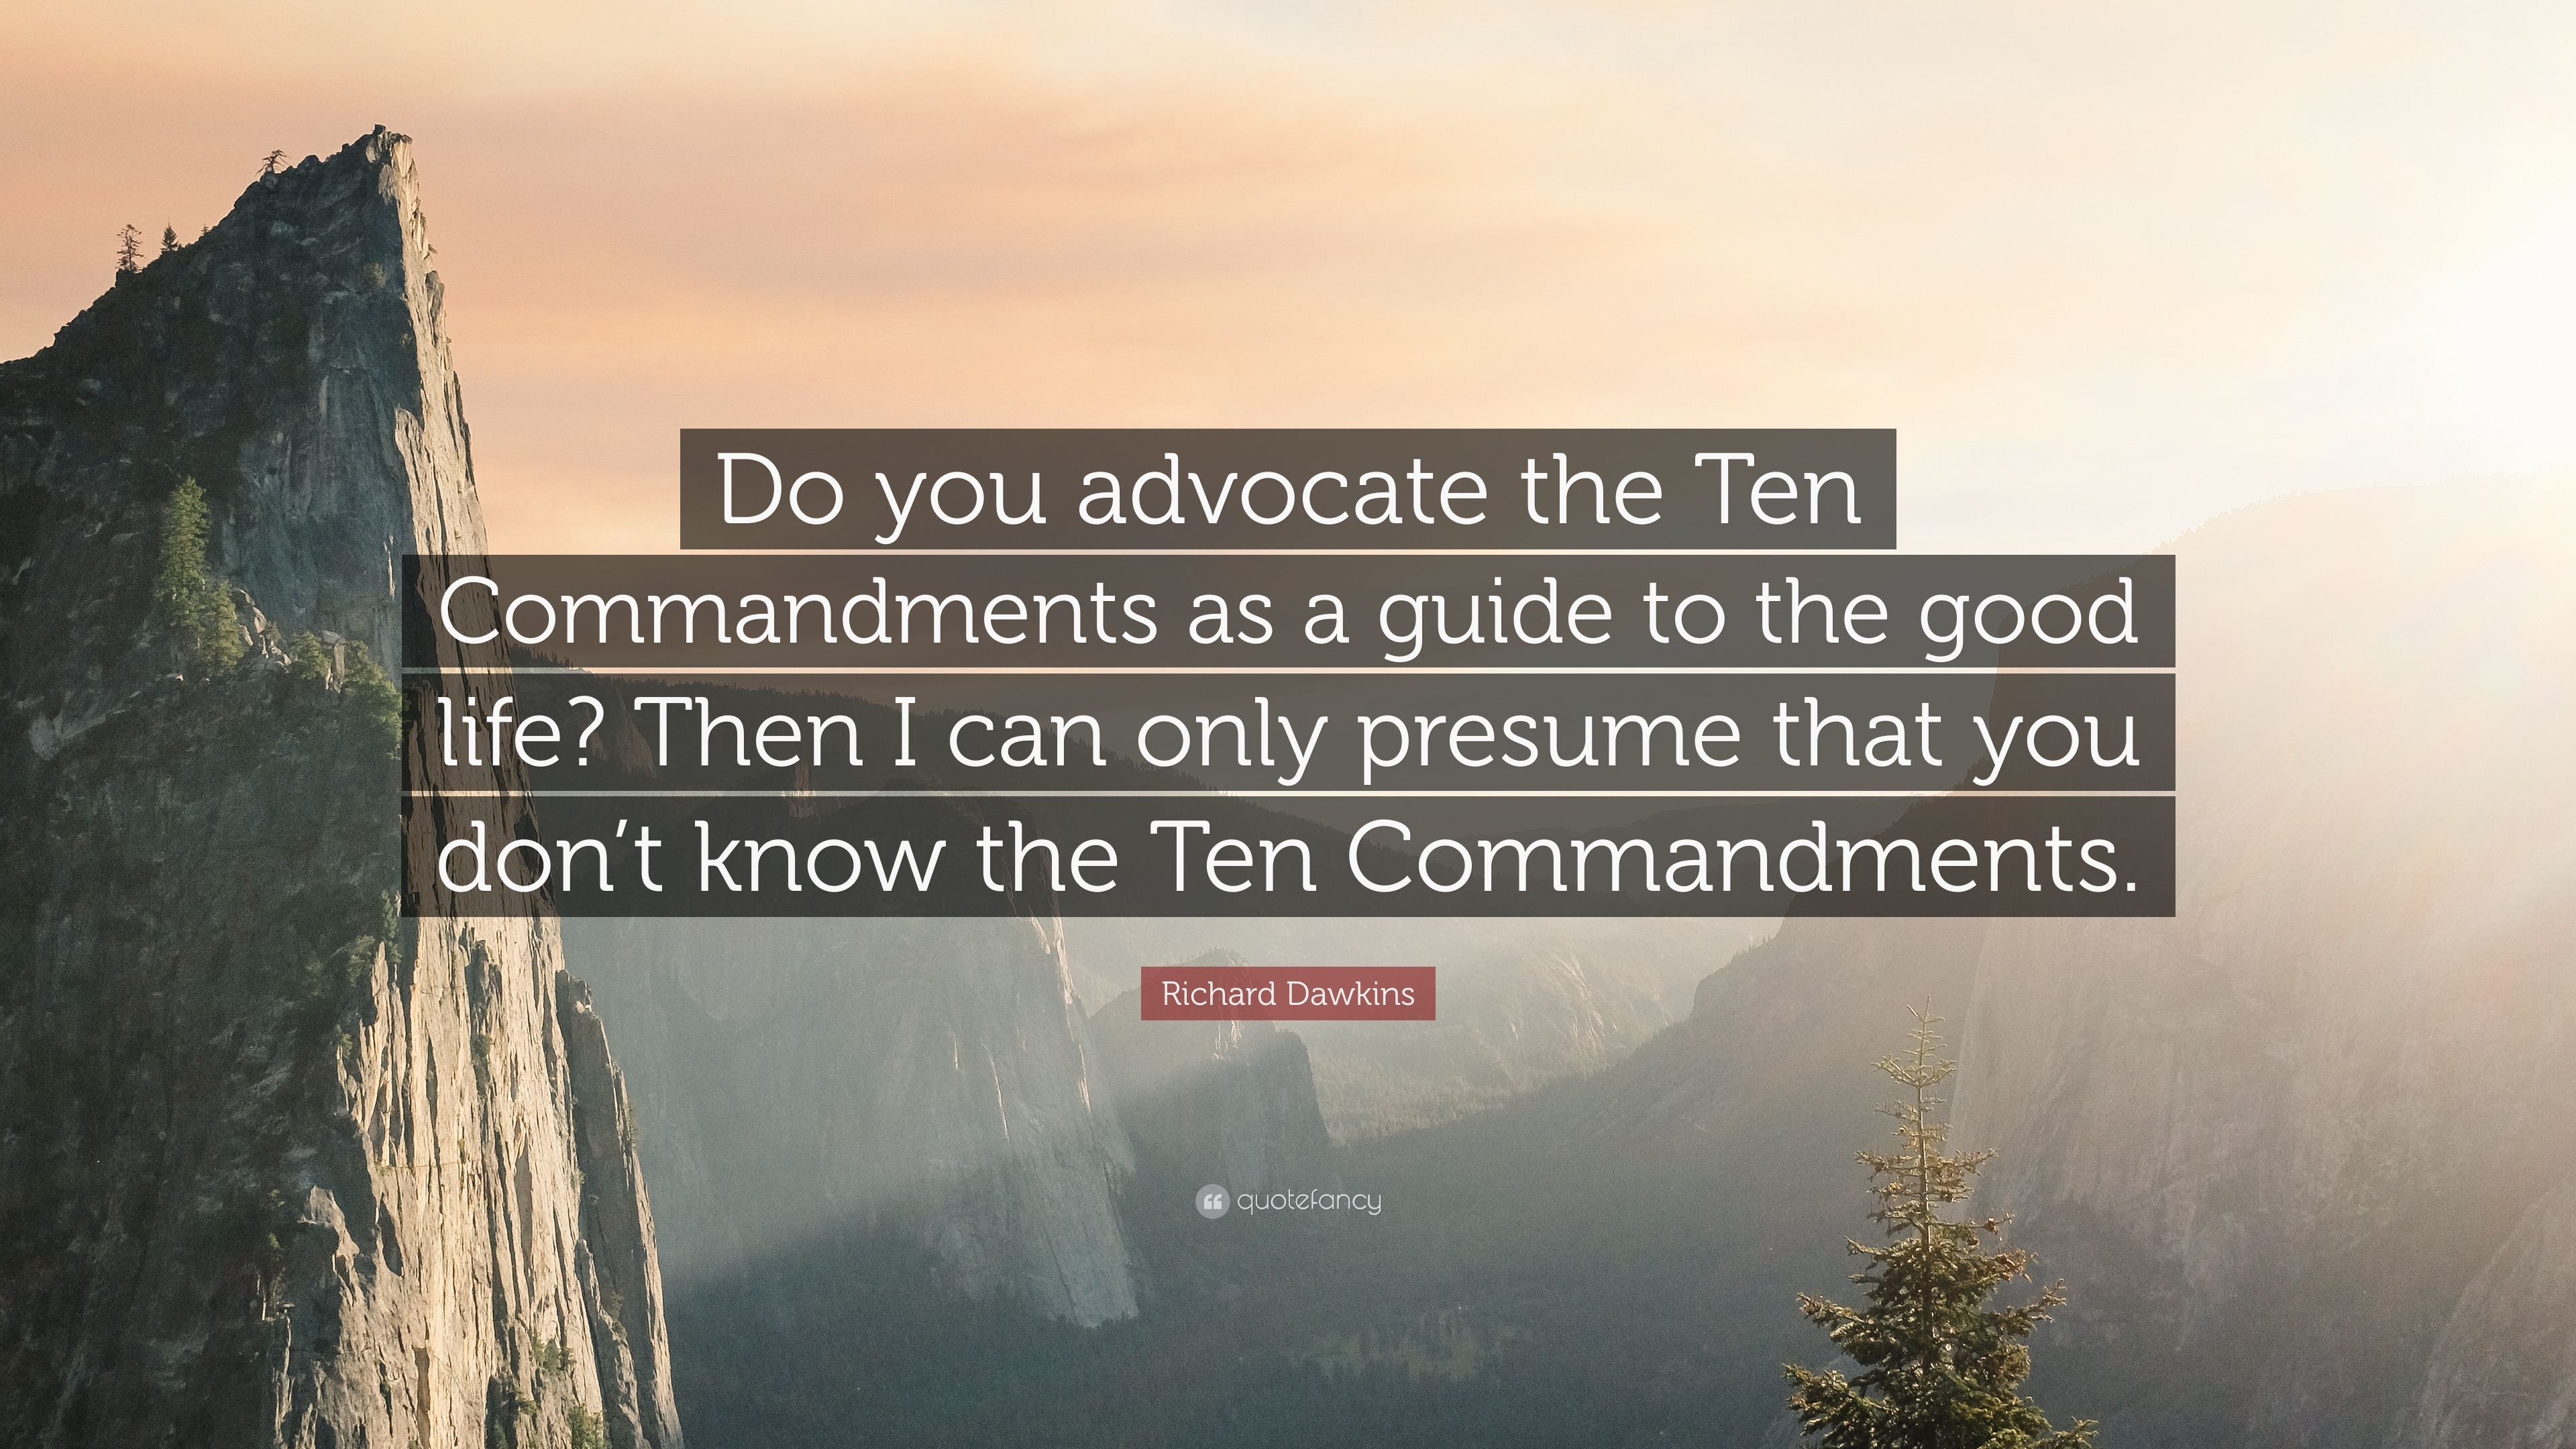 Richard Dawkins Quote: “Do you advocate the Ten Commandments as a guide to  the good life? Then I can only presume that you don't know the Ten Co...”